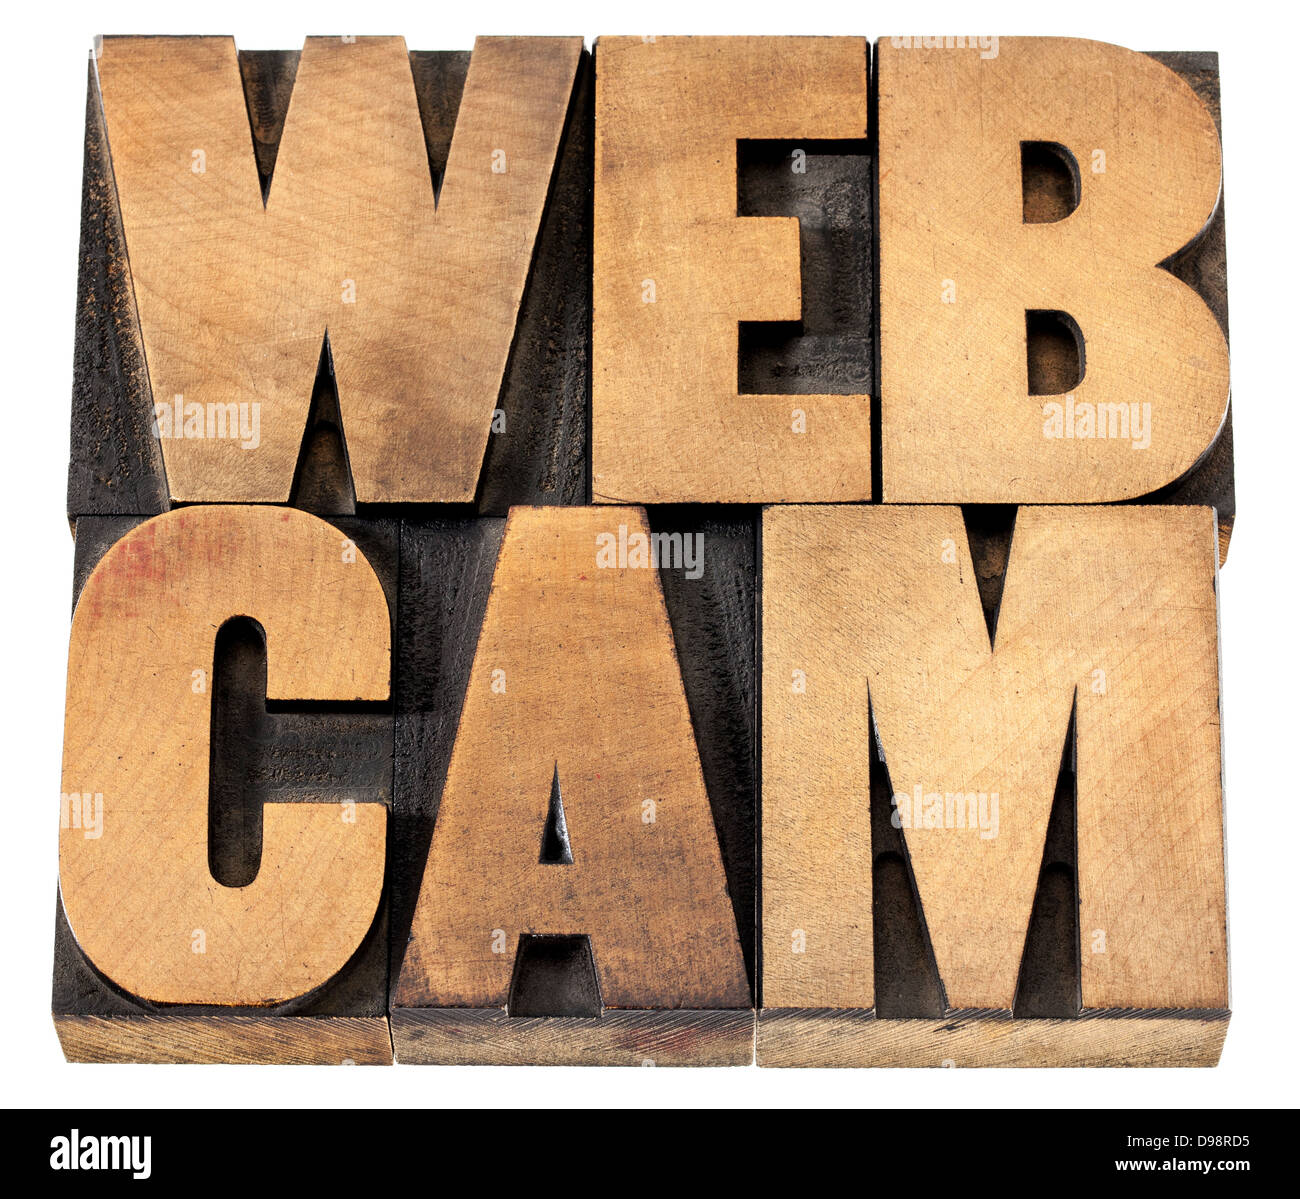 webcam - web video camera - isolated text in letterpress wood type Stock Photo